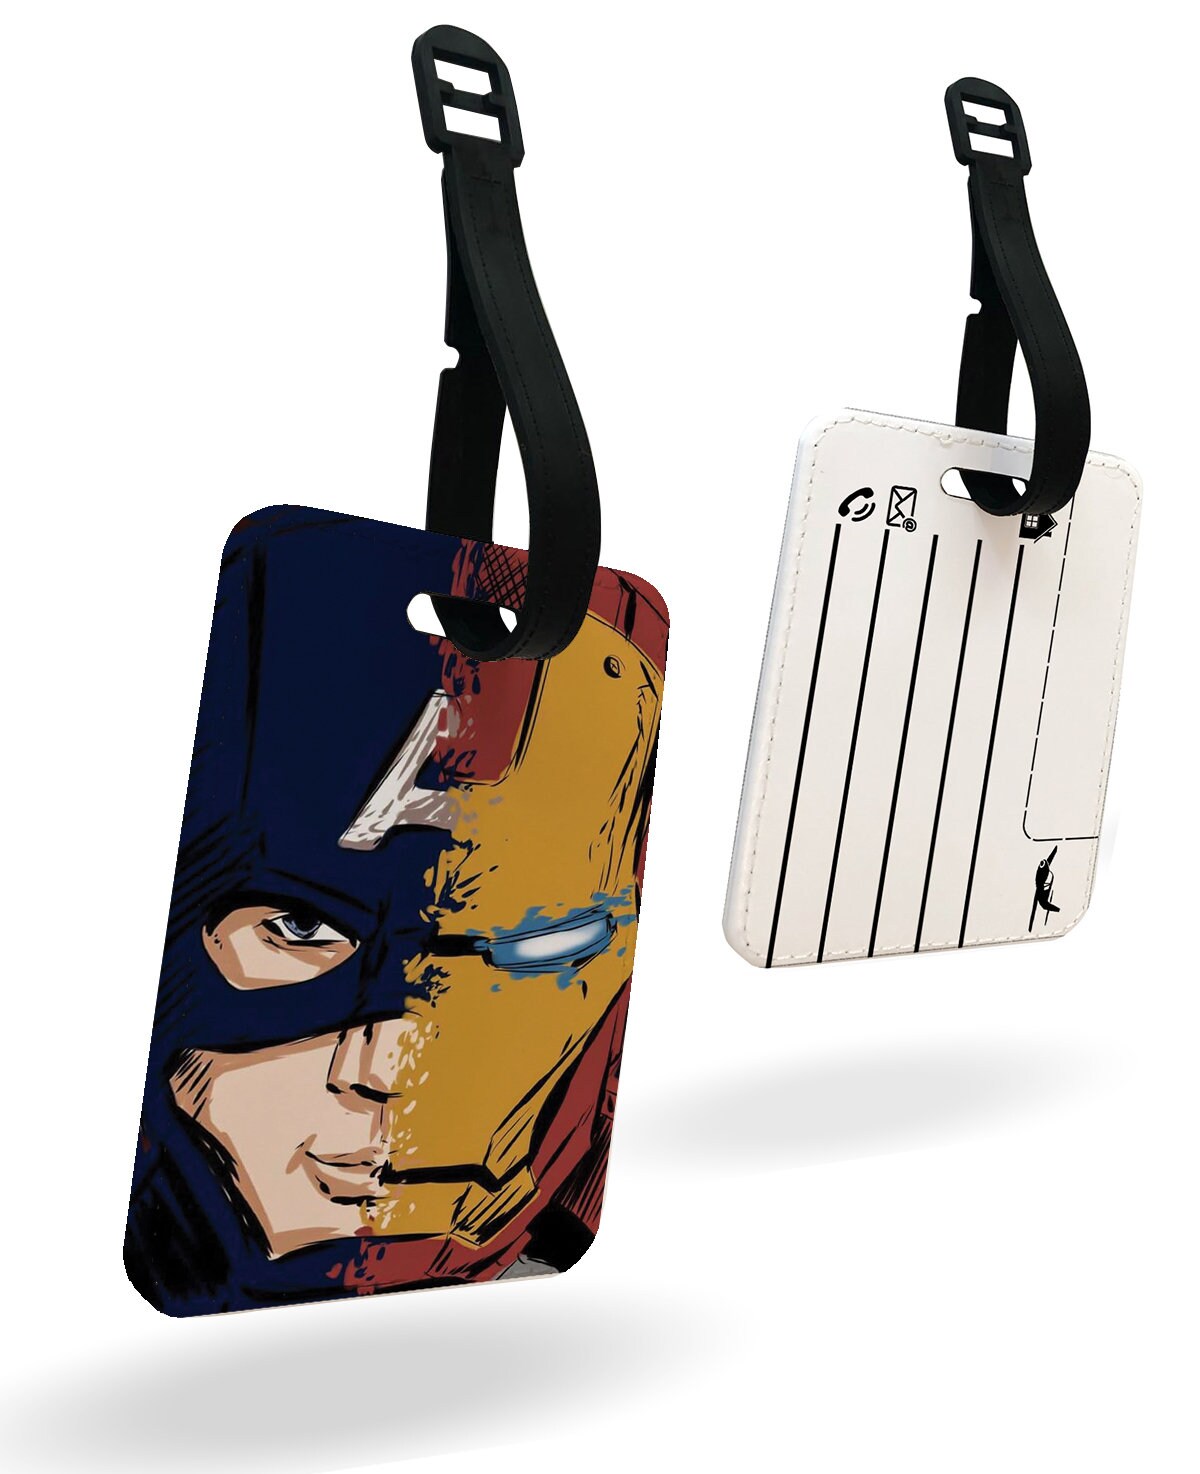 Personalised Faux Leather Passport Cover & Luggage Tag Marvel Avengers Captain America Ironman Spiderman Hulk Thor Endgame Infinity War